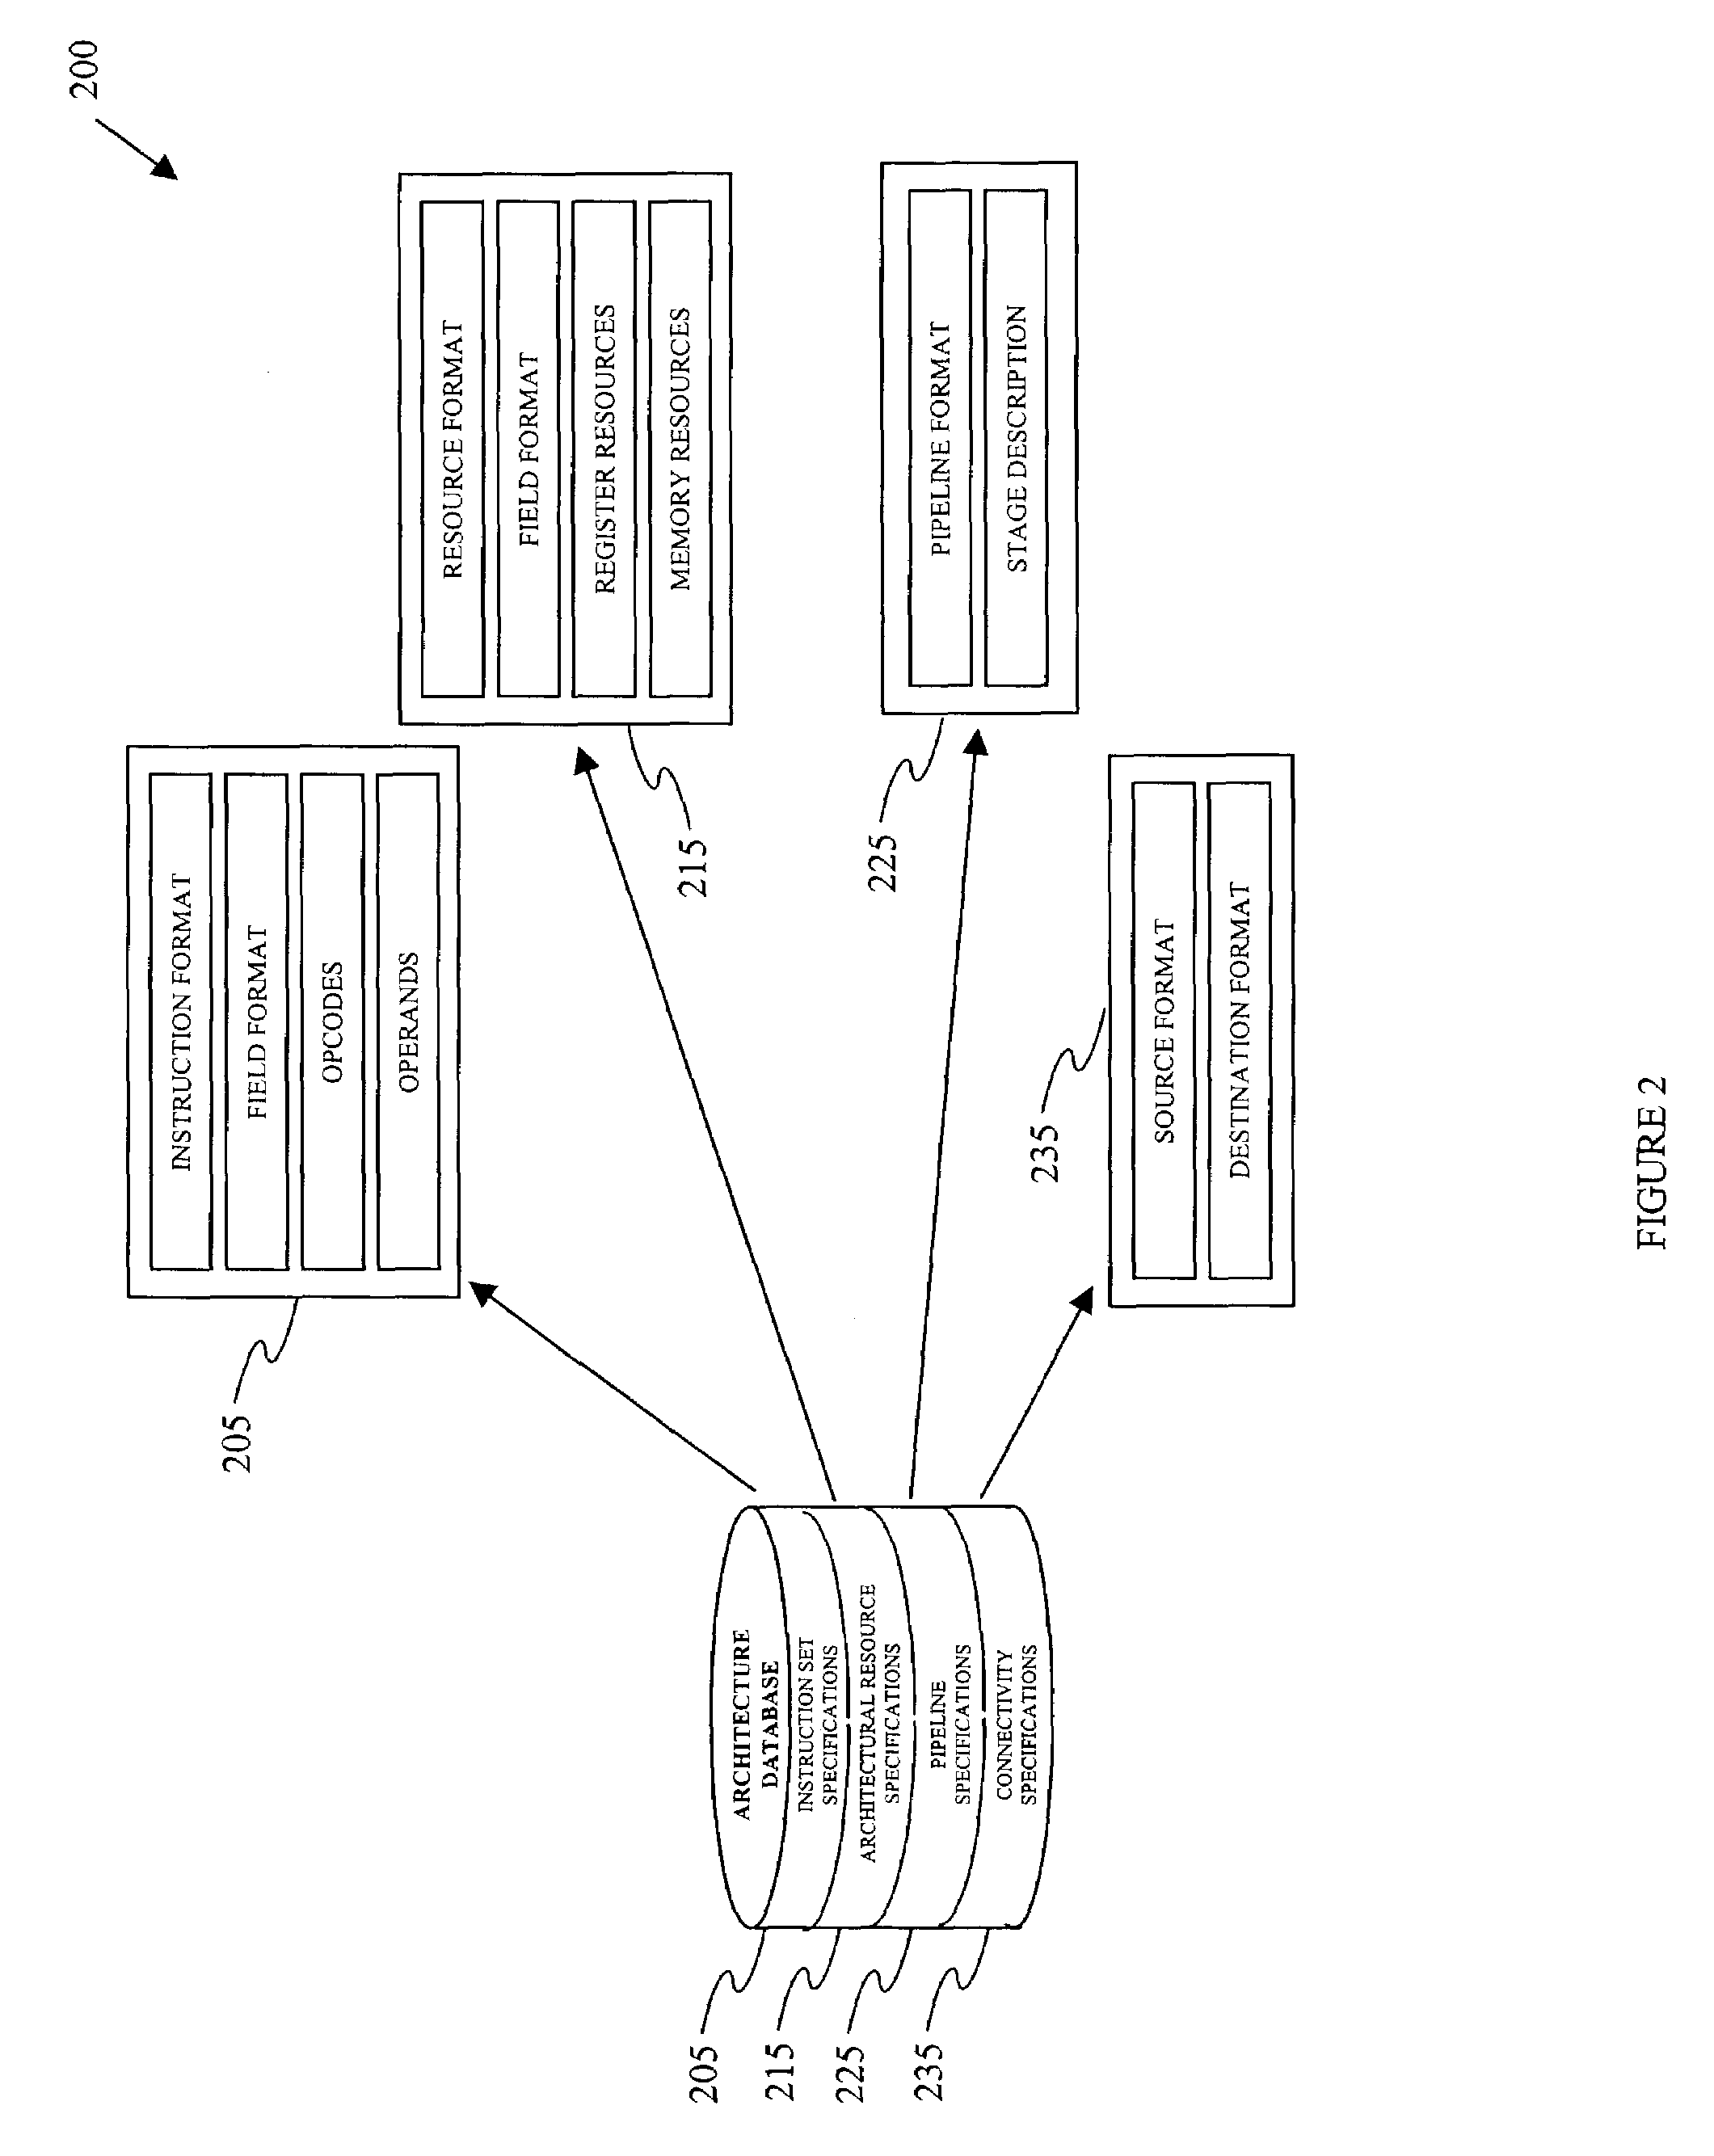 System and method for reference-modeling a processor